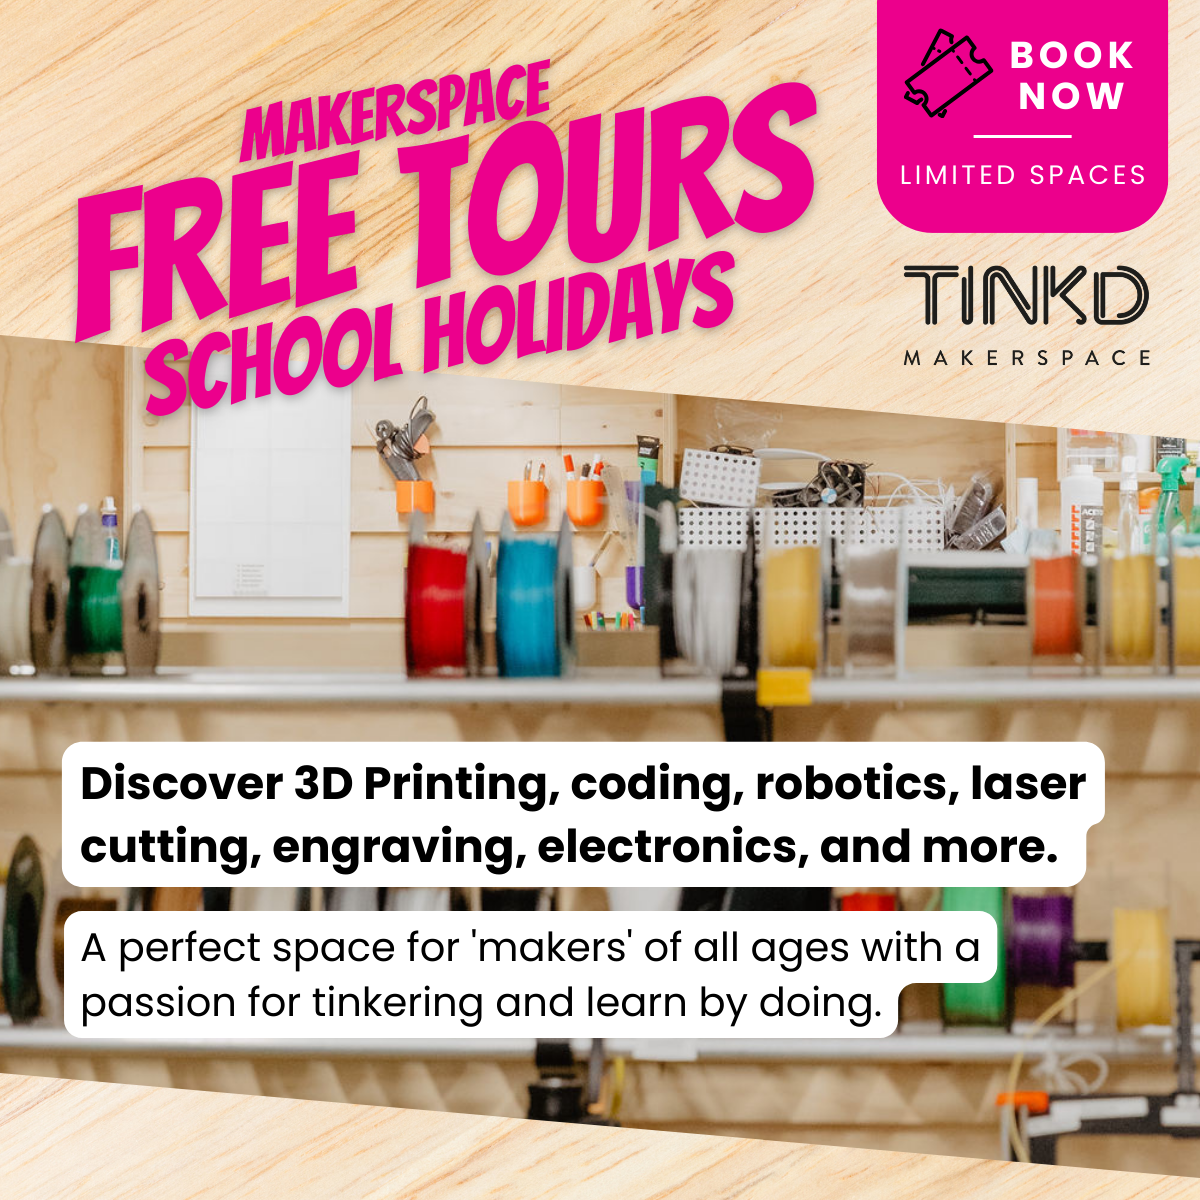 Come for a free tour of Tinkd Makerspace during the July school holidays in Tauranga